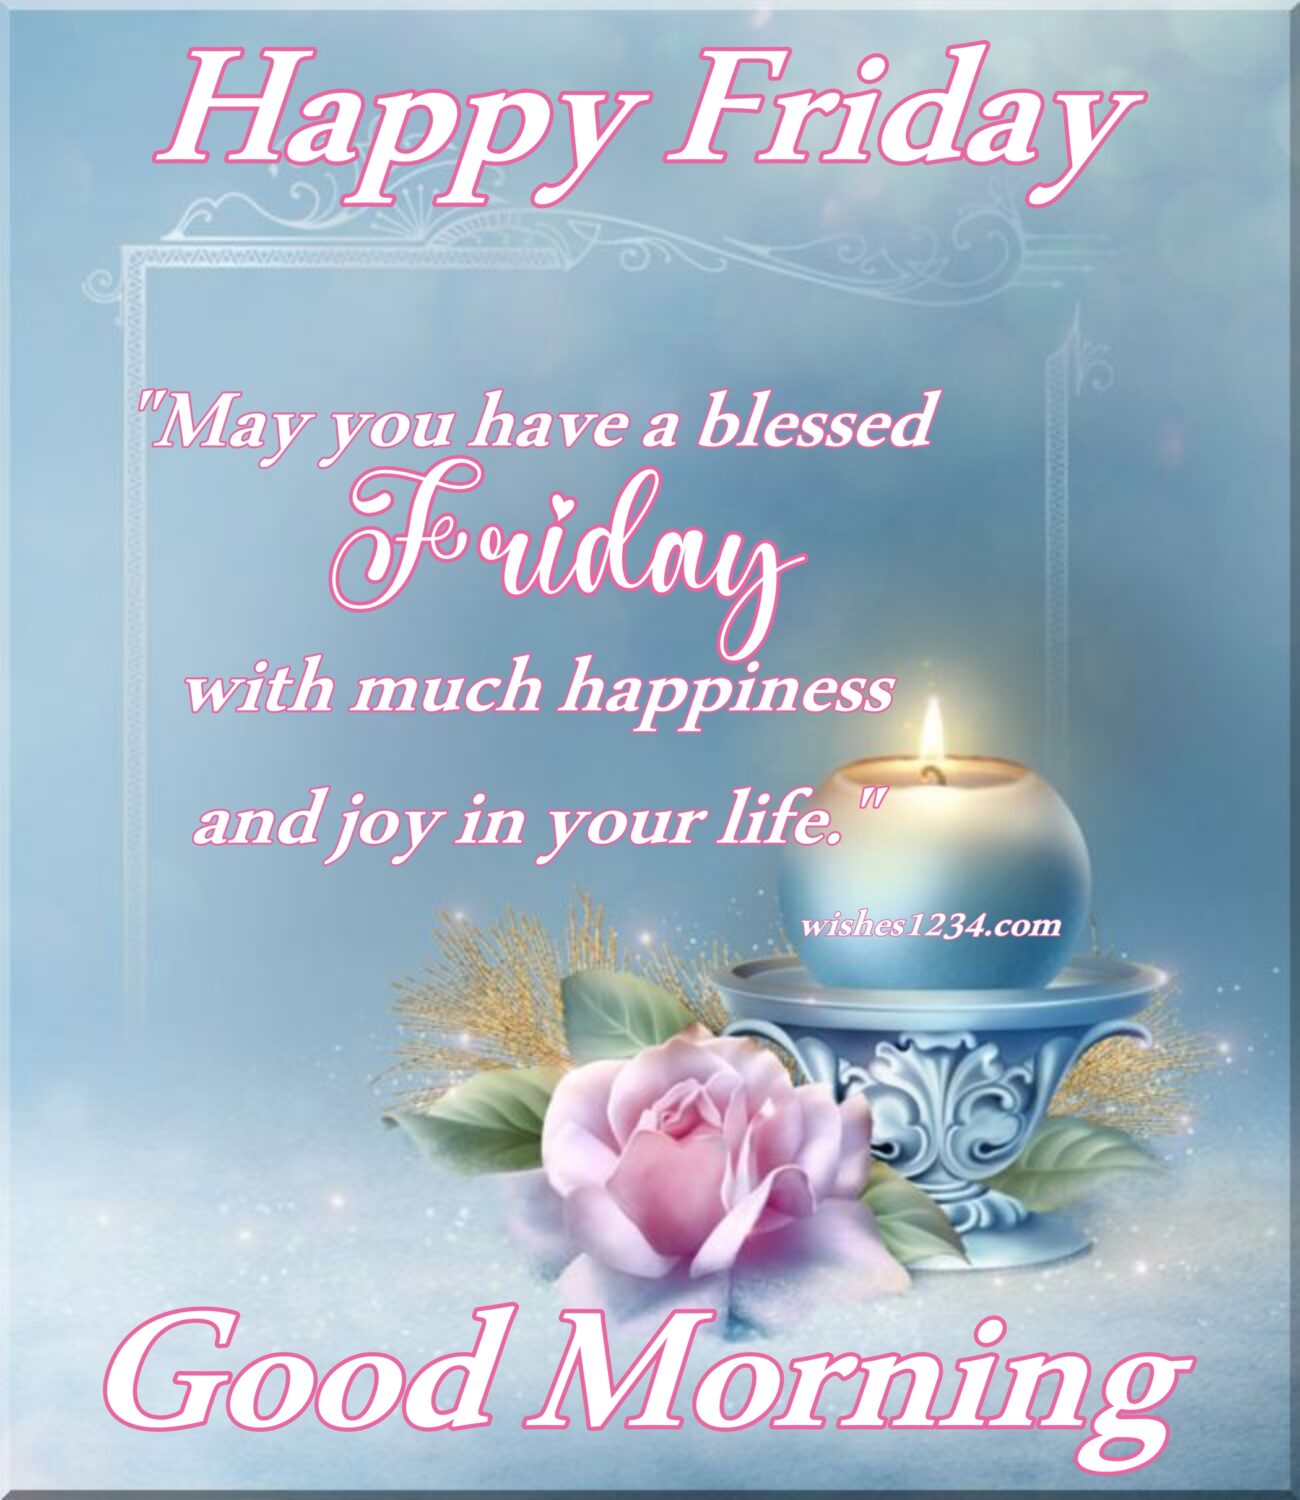 Candle and flowers with blue background, Friday Quotes | Good Morning Friday | Happy Friday | Blessed Friday Quotes.